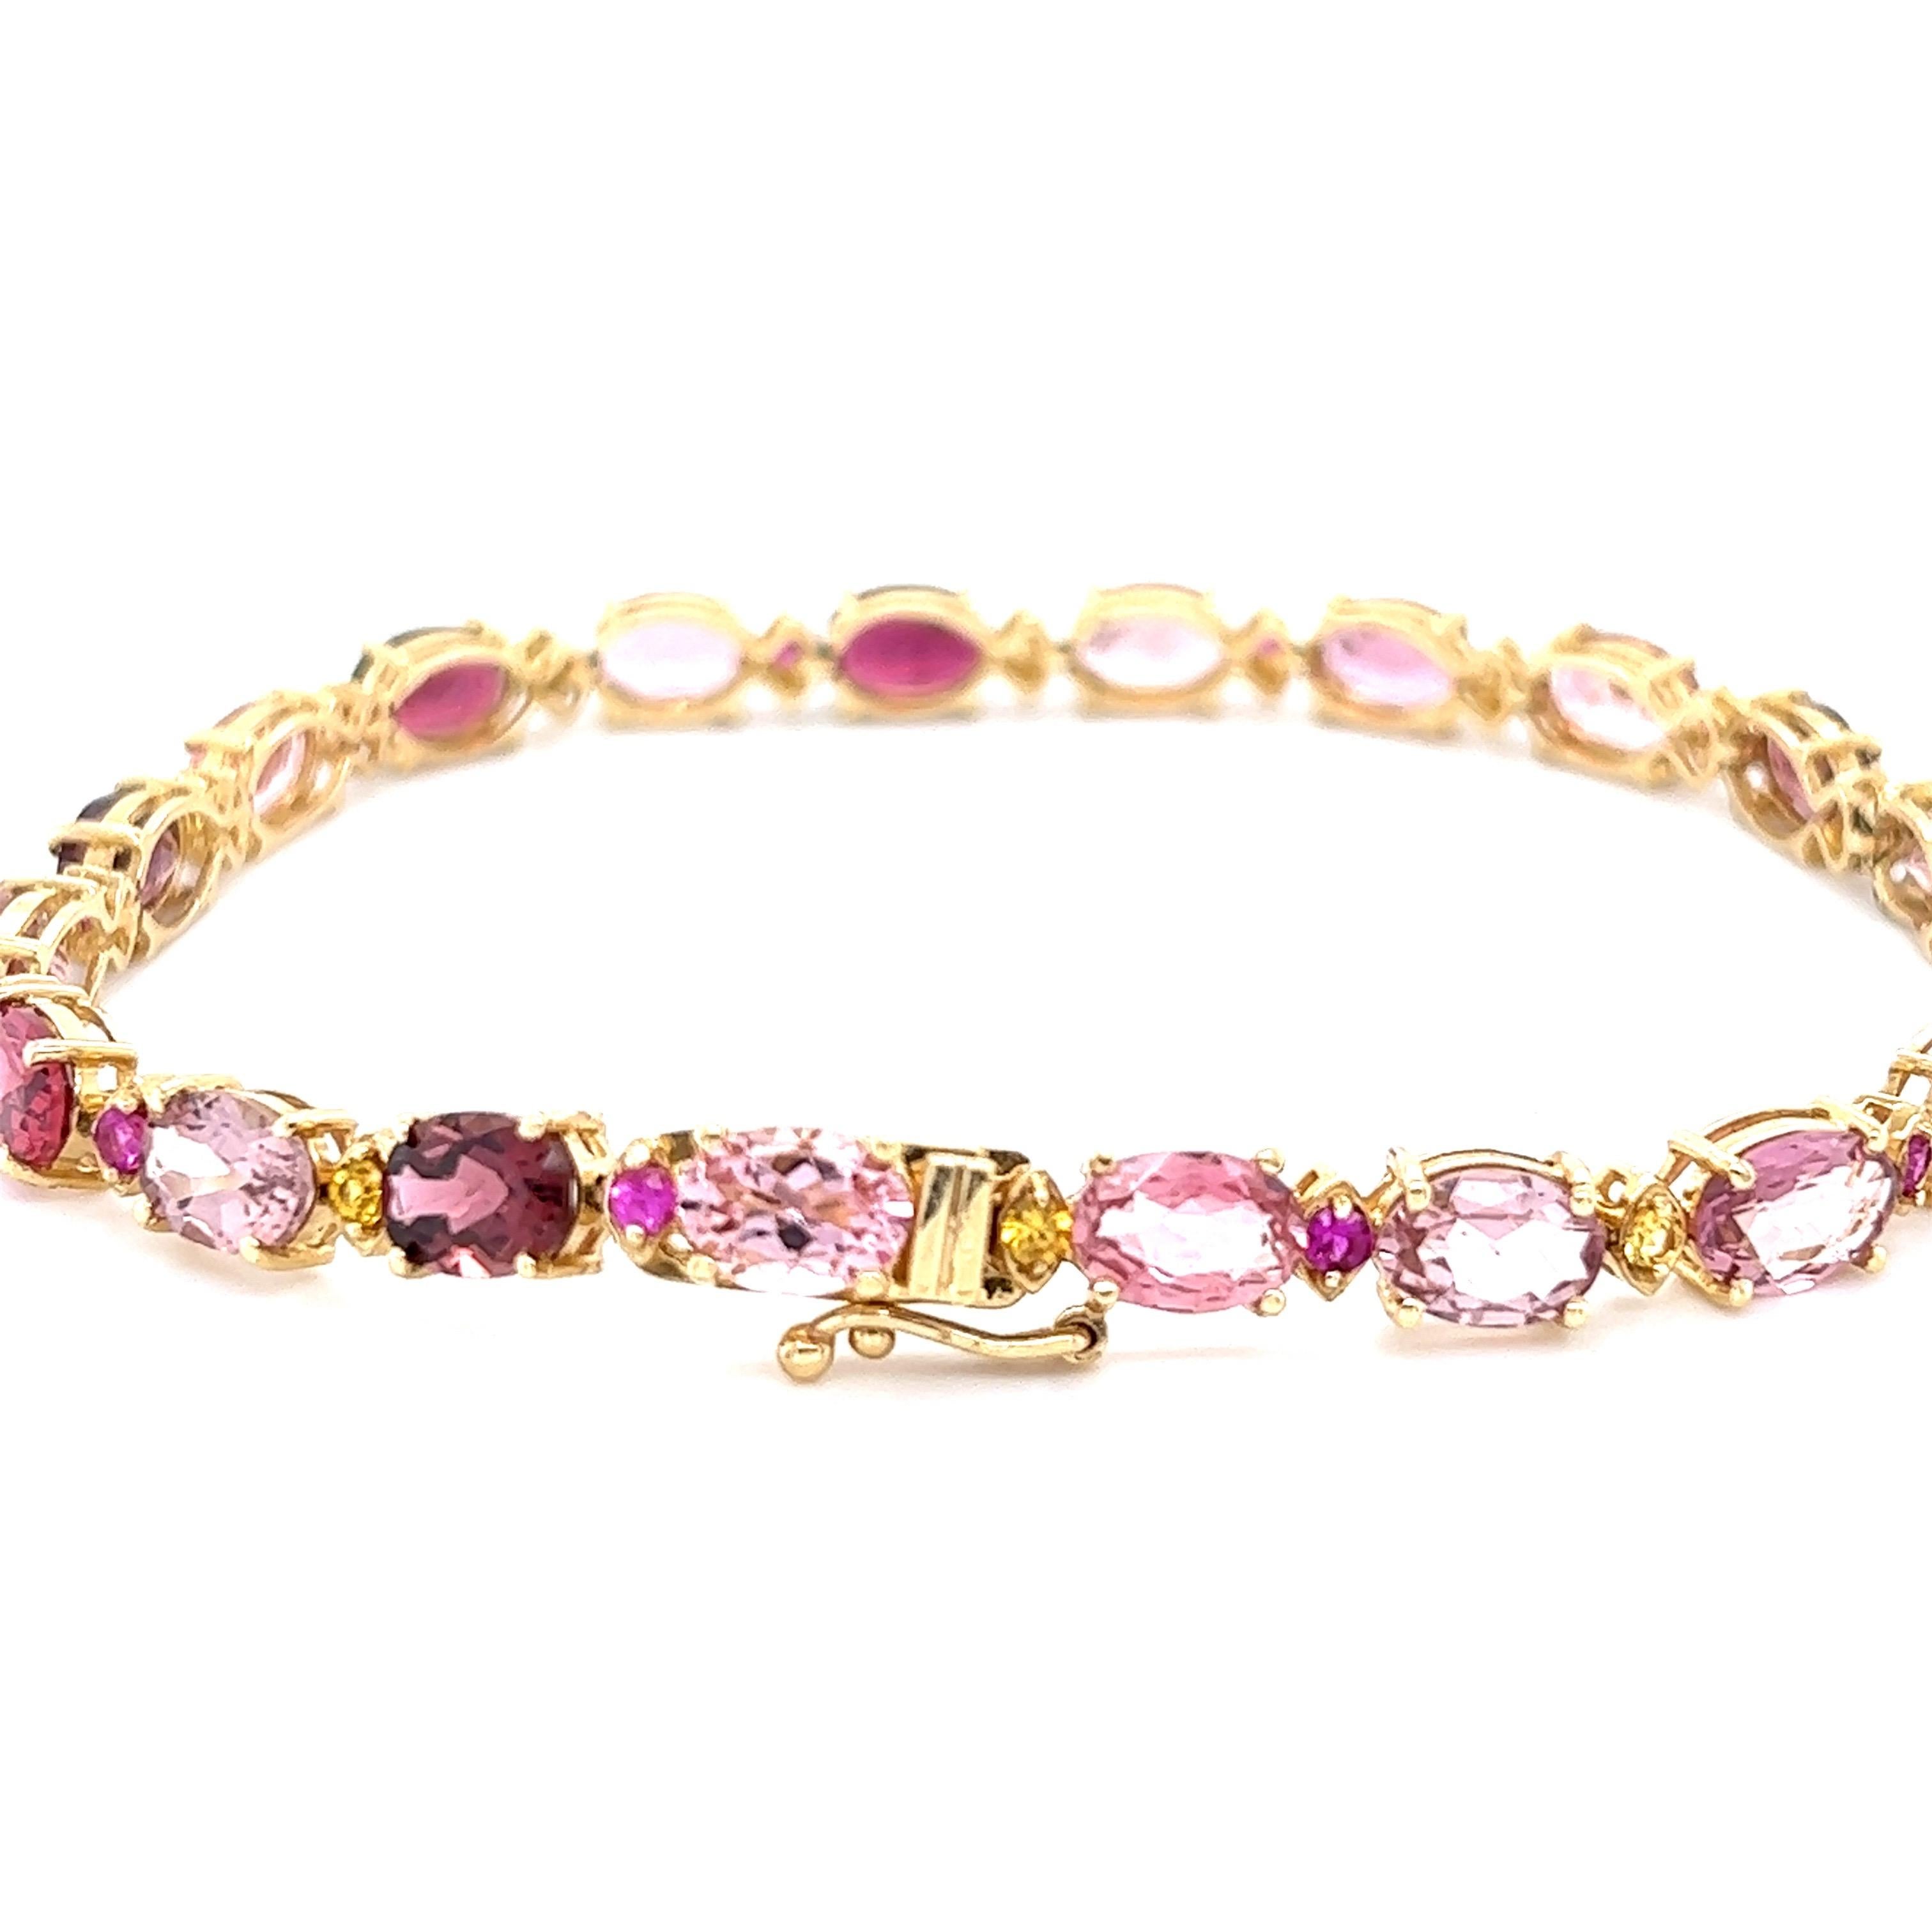 This Bracelet has 20 Natural Oval Cut Tourmalines that weigh 14.68 Carats. It also has 10 Round Cut Yellow Sapphires that weigh 0.48 Carats and 10 Round Cut Pink Sapphires that weigh 0.47 Carats. The total carat weight of the bracelet is 15.63